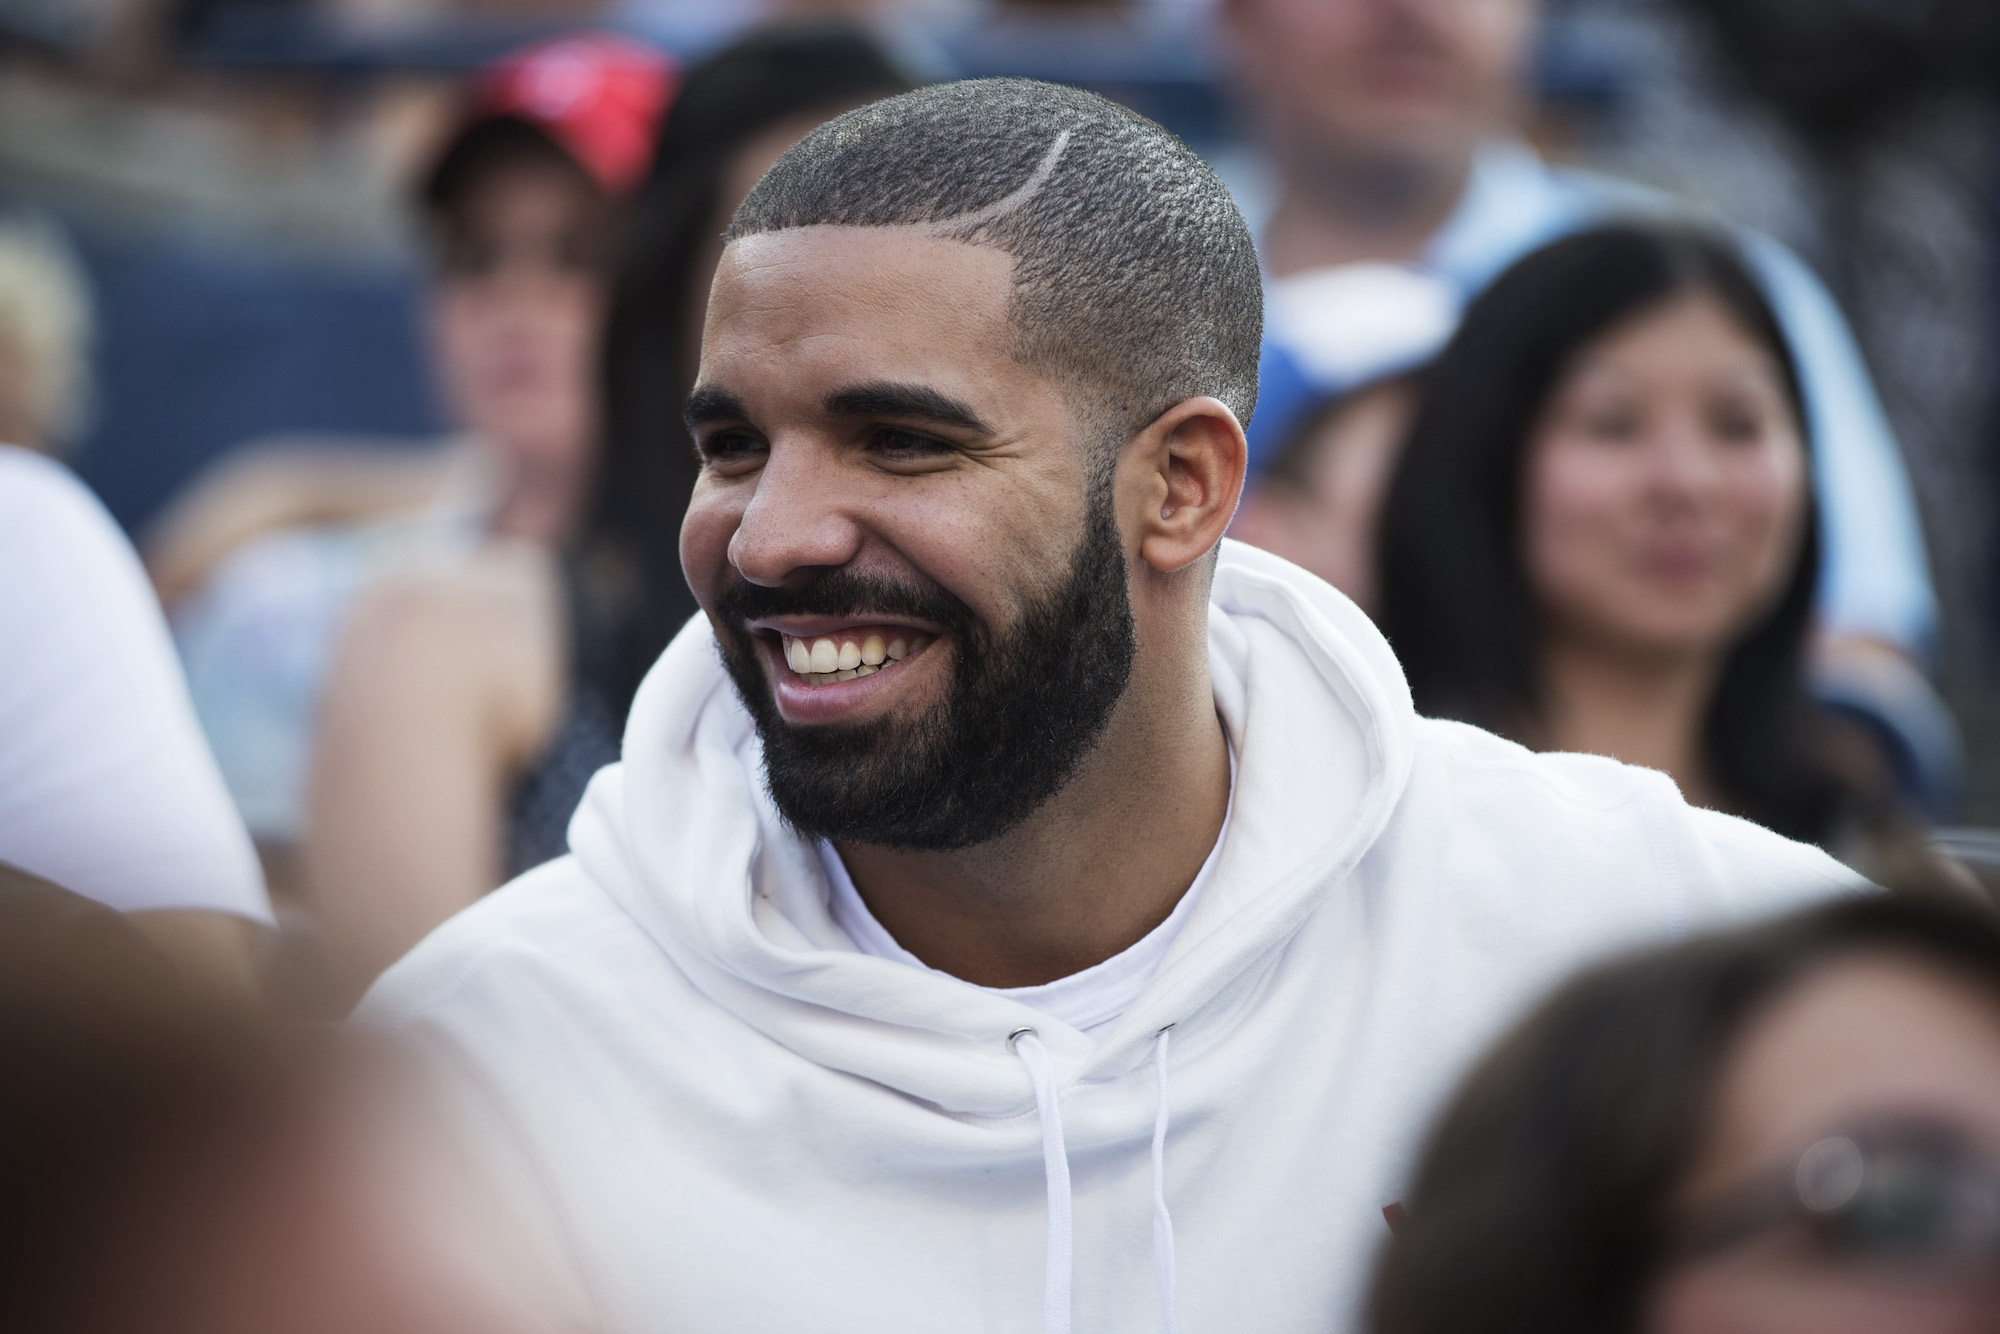 Drake, who was sued by Vogue for a false magazine cover, smiling for a photo